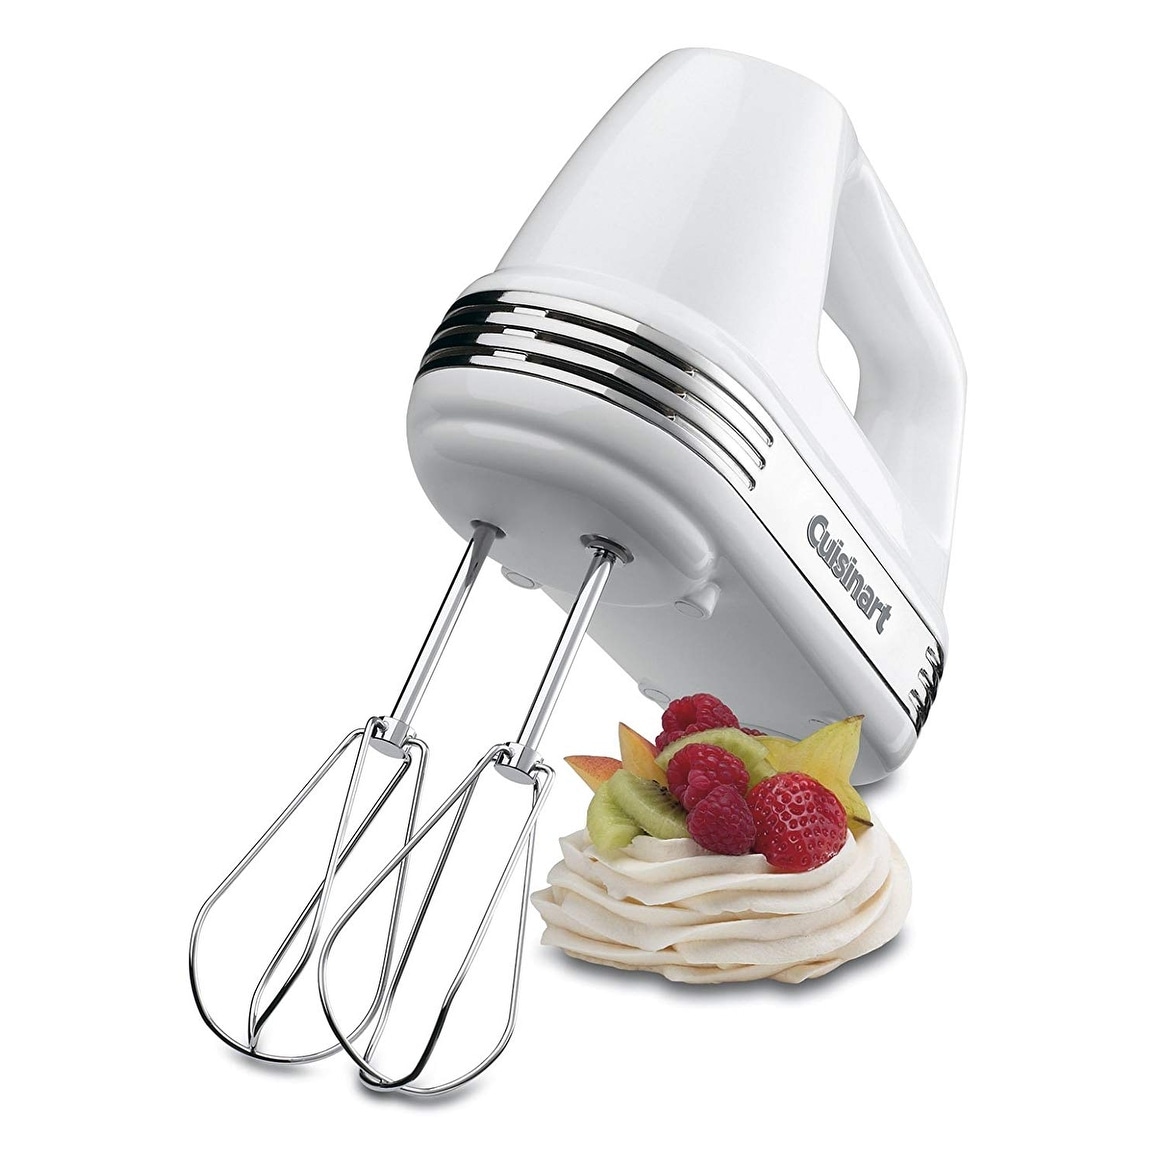 2020 Electric Stand Mixer 7 Speed Automatic Whisk Table Stand